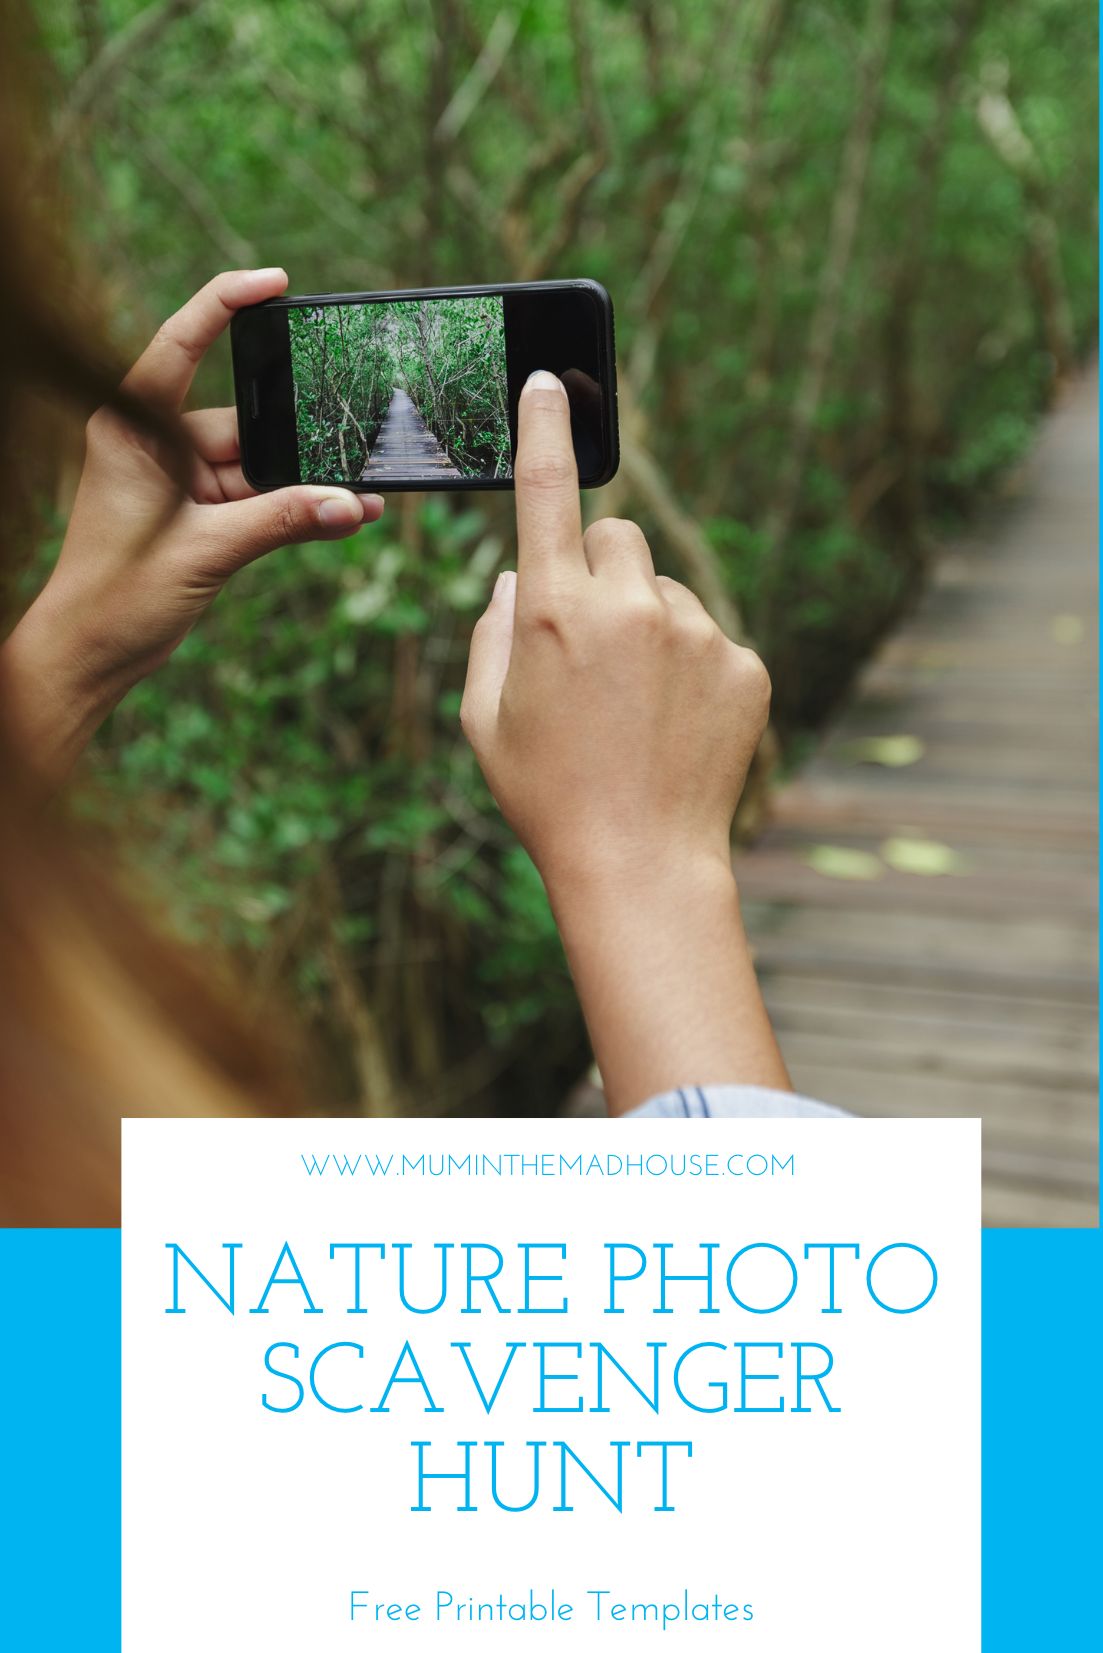 Nature Photo Scavenger Hunt with Free Printable Template